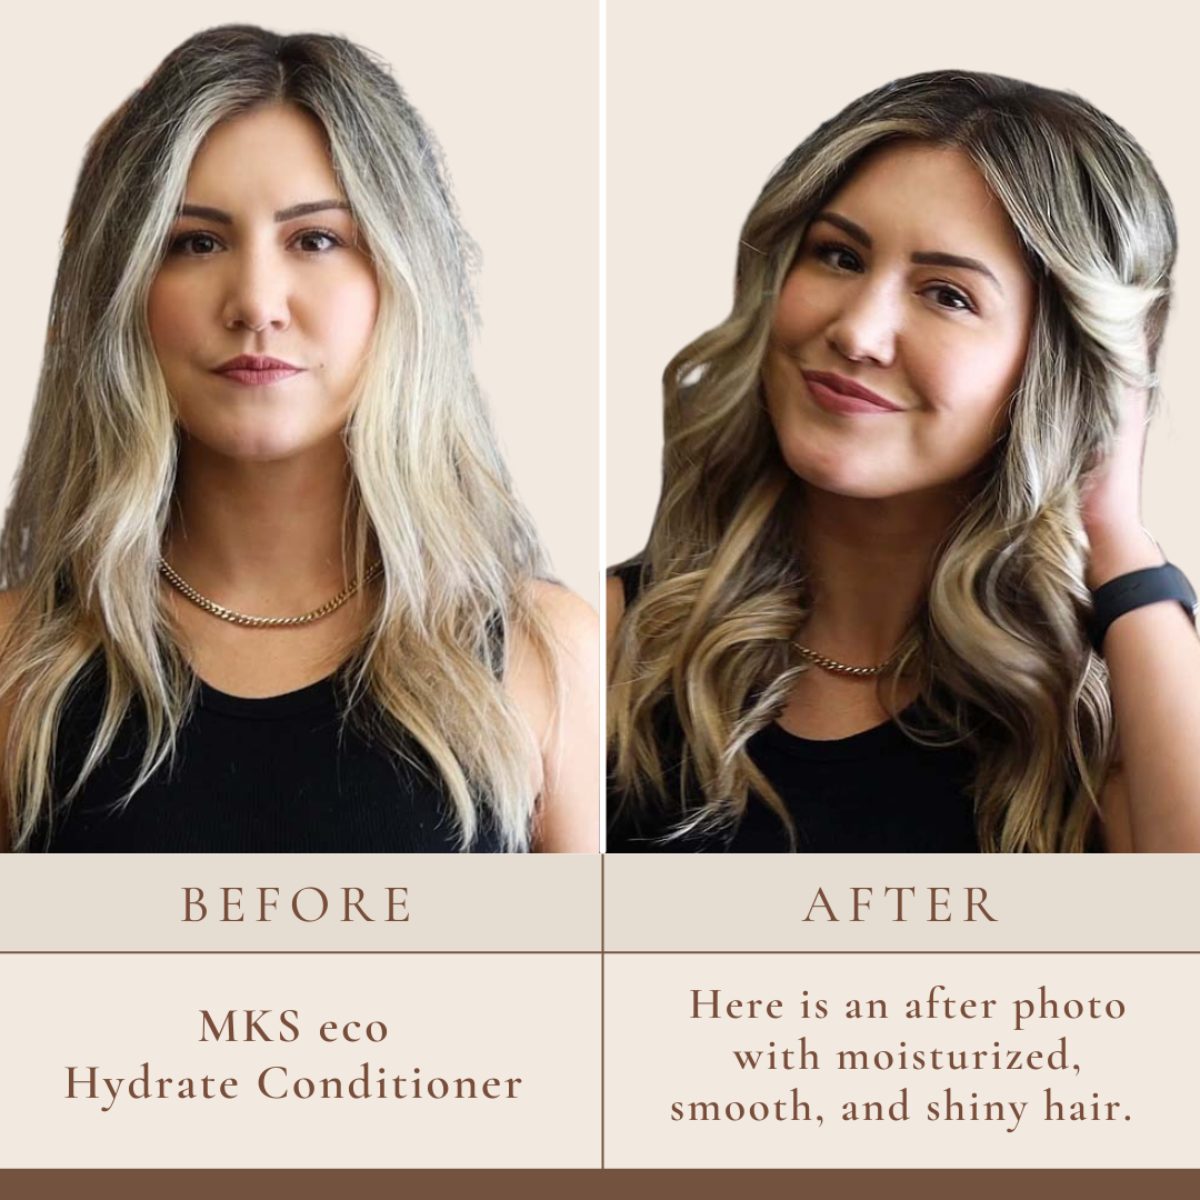 MKS eco Hydrate Conditioner Before After